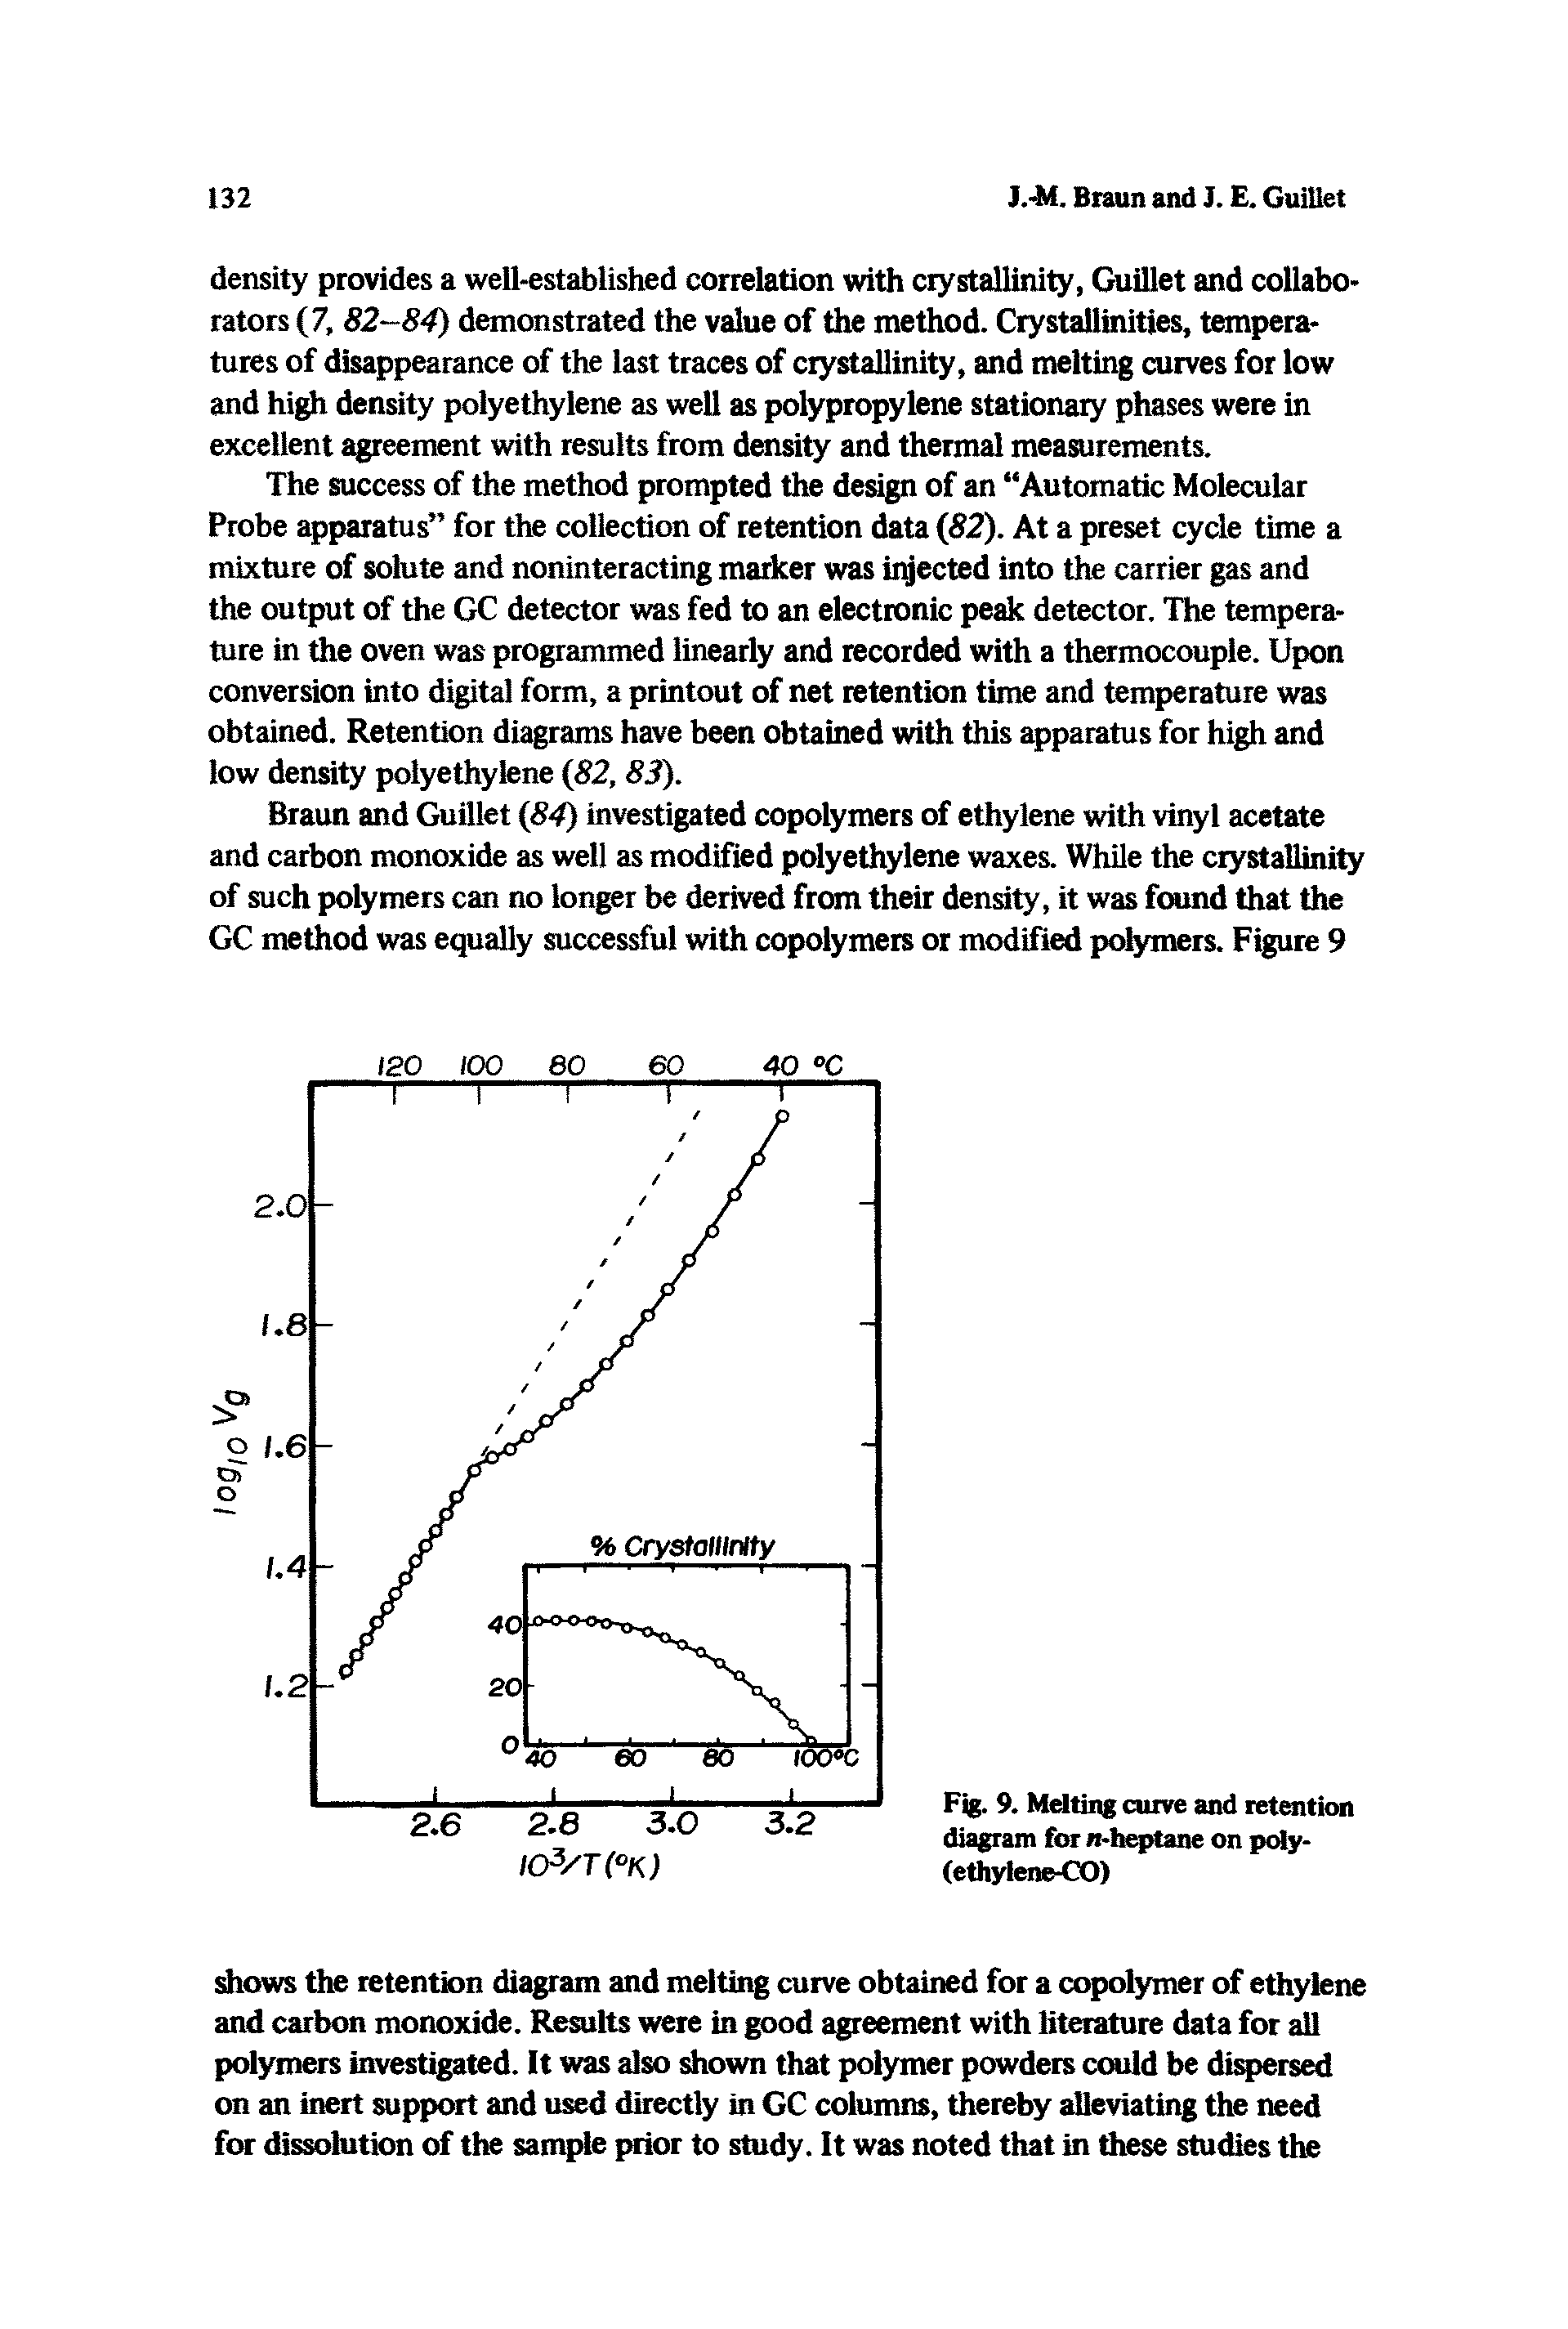 Fig. 9. Mdting curve and retention diagram for R-hq>tane on pdly-(ethylene M)...